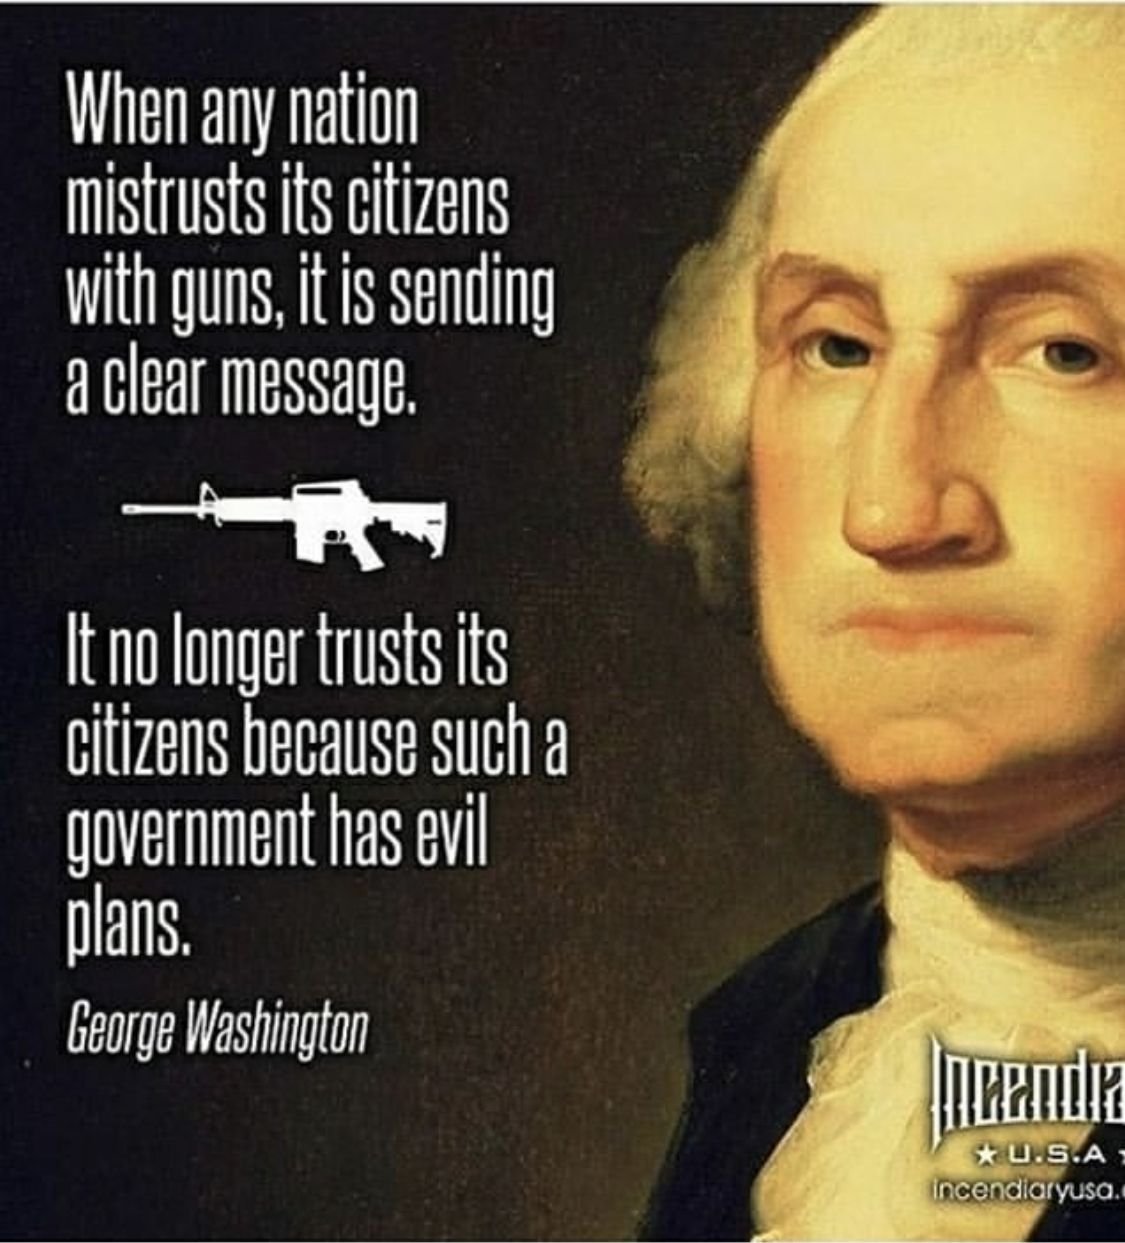 2nd Amendment Quotes (73 of them!)